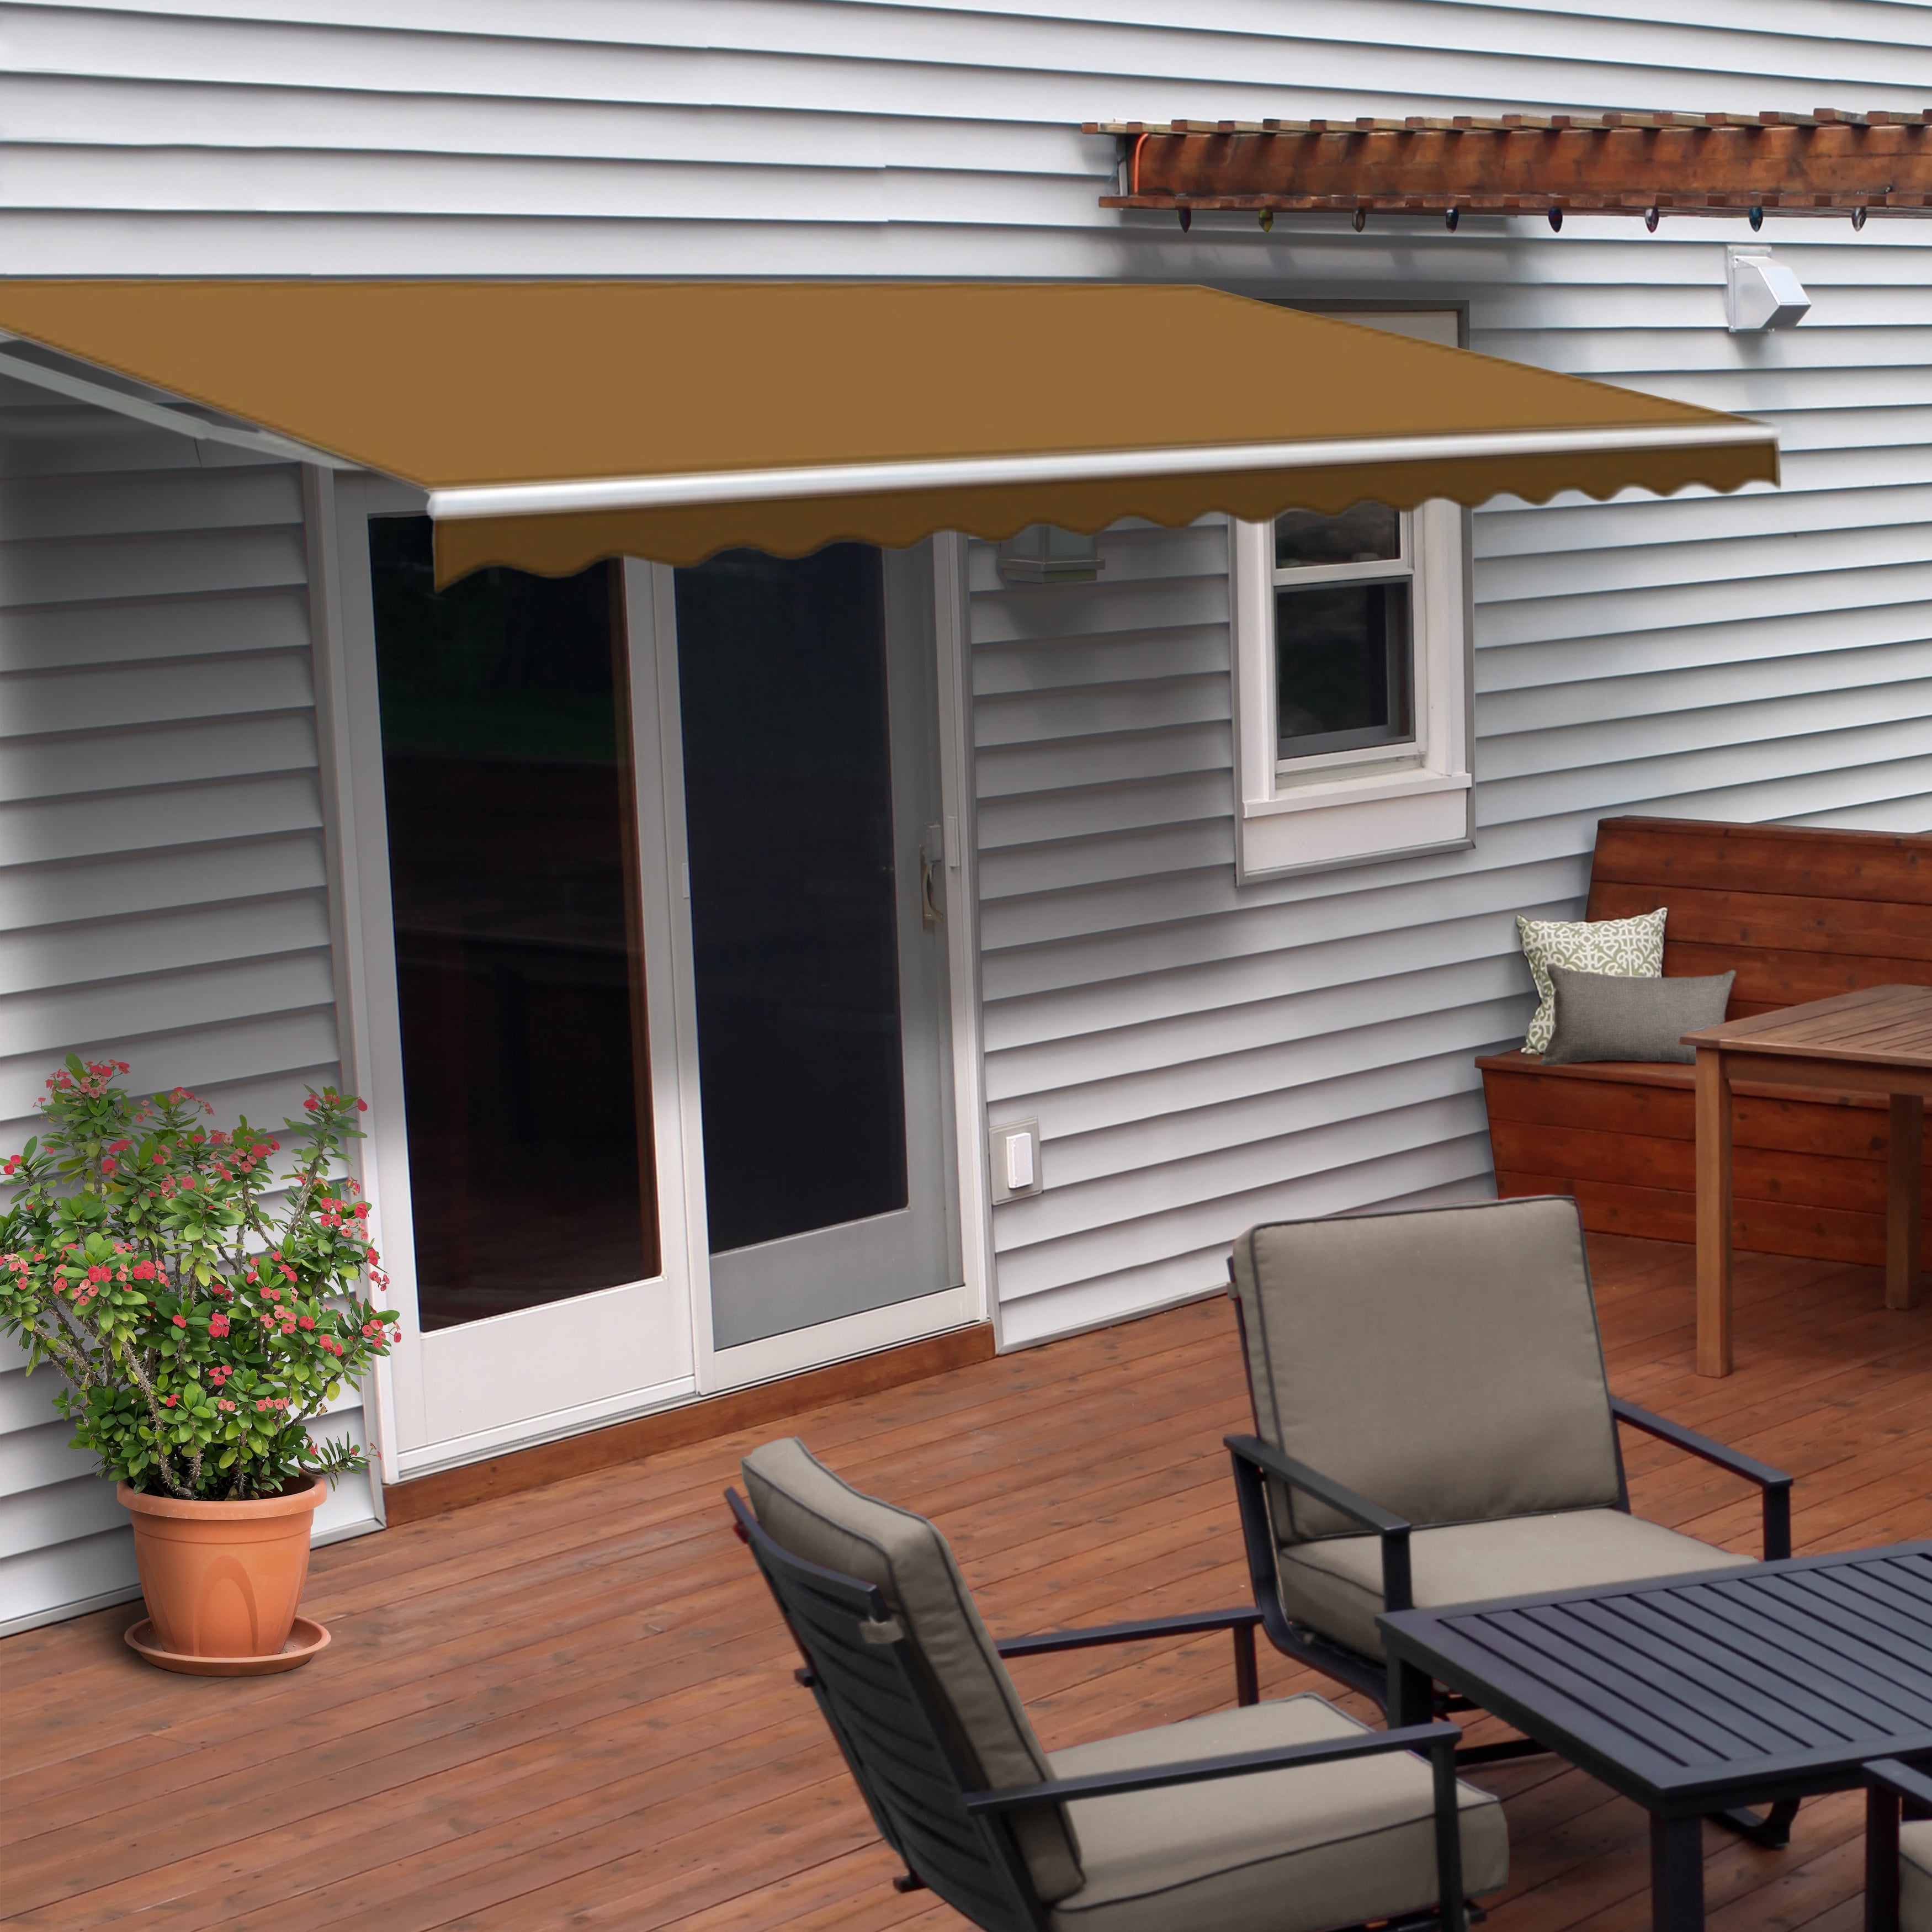 12x10 Ft Exterior Sunshade Outdoor Canopy Brown ALEKO Manual Retractable Patio Awning with Black Frame 